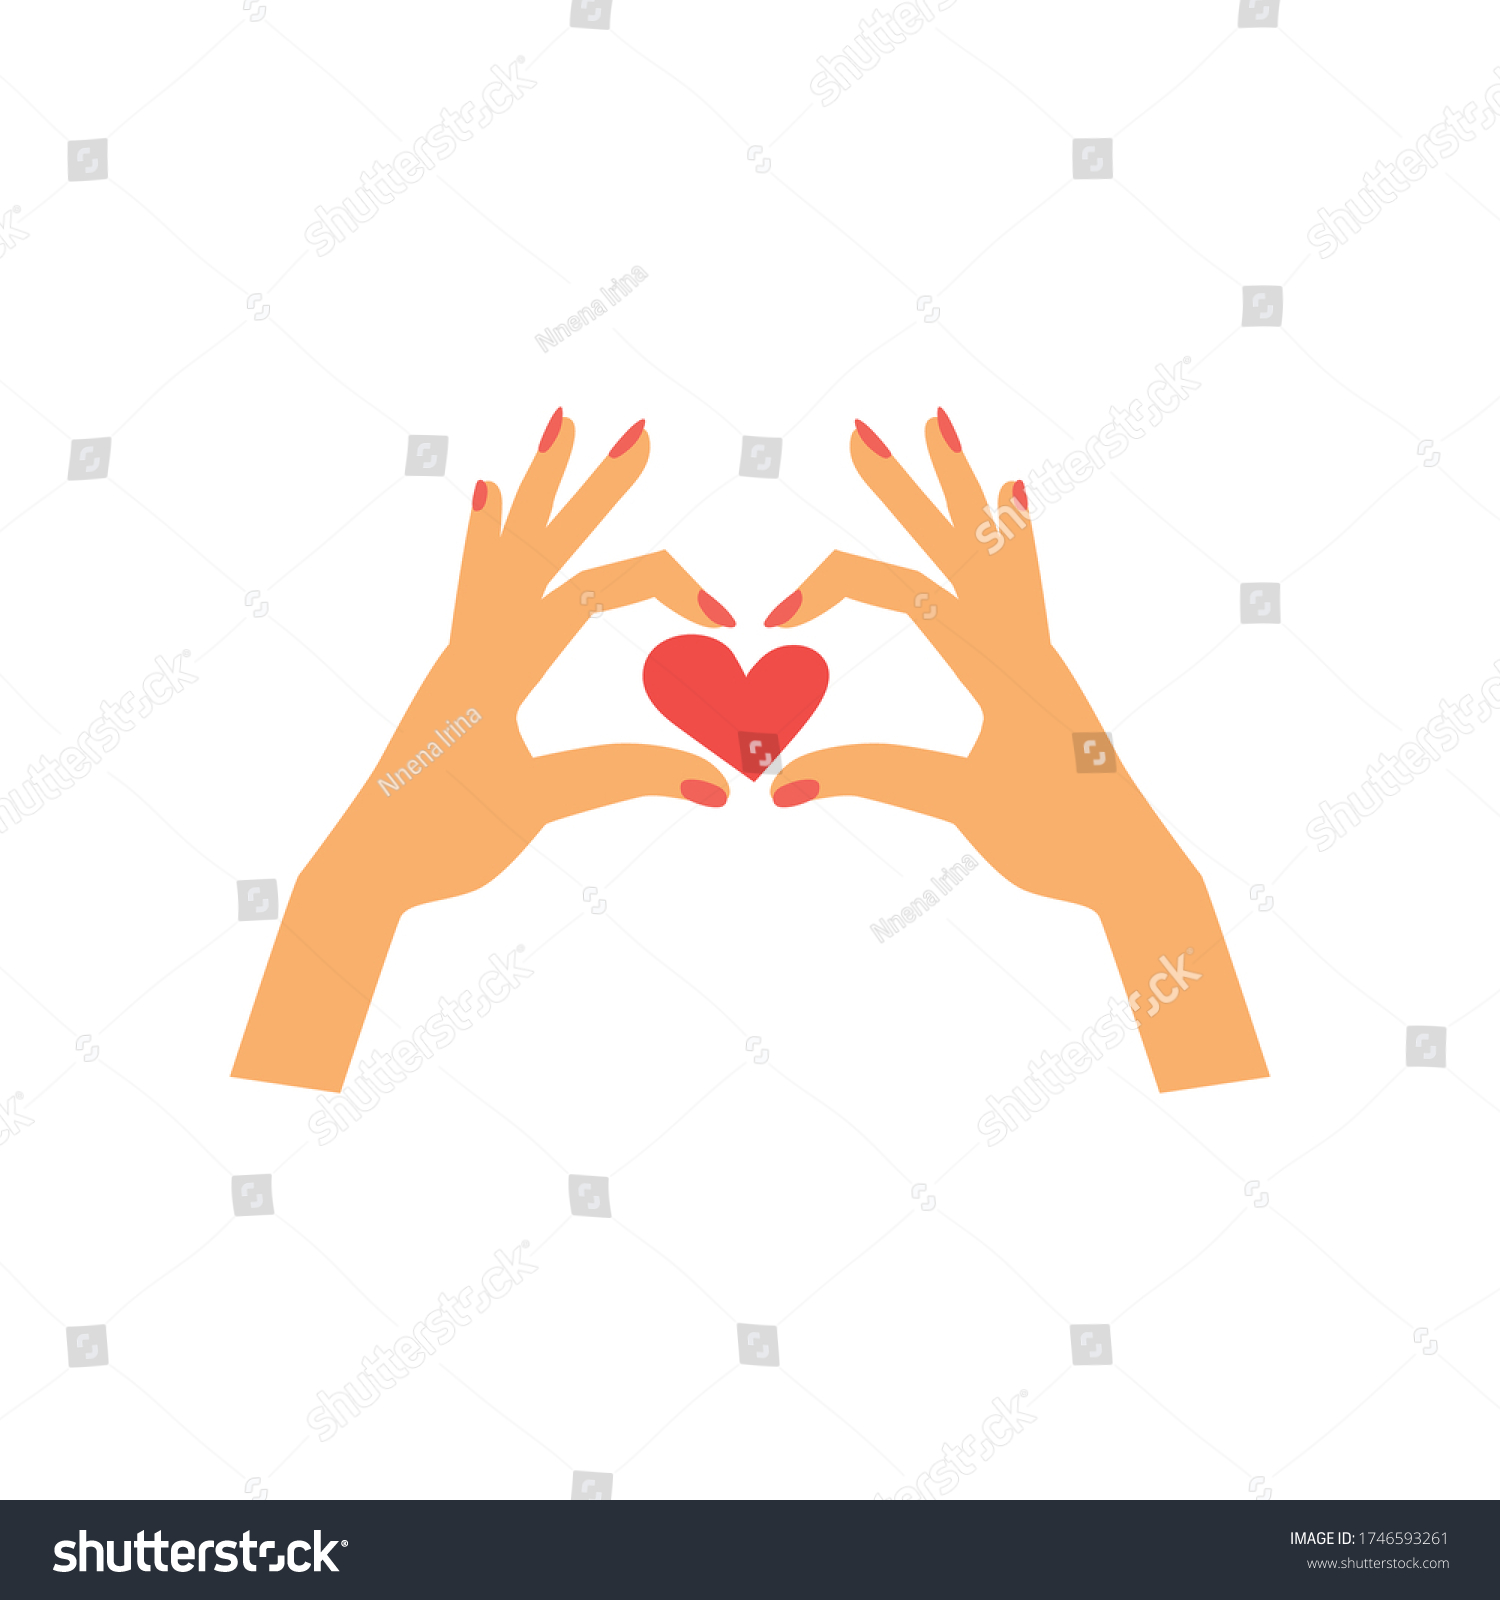 Female Hands Depicting Heart Hand Gesture Stock Vector (Royalty Free ...